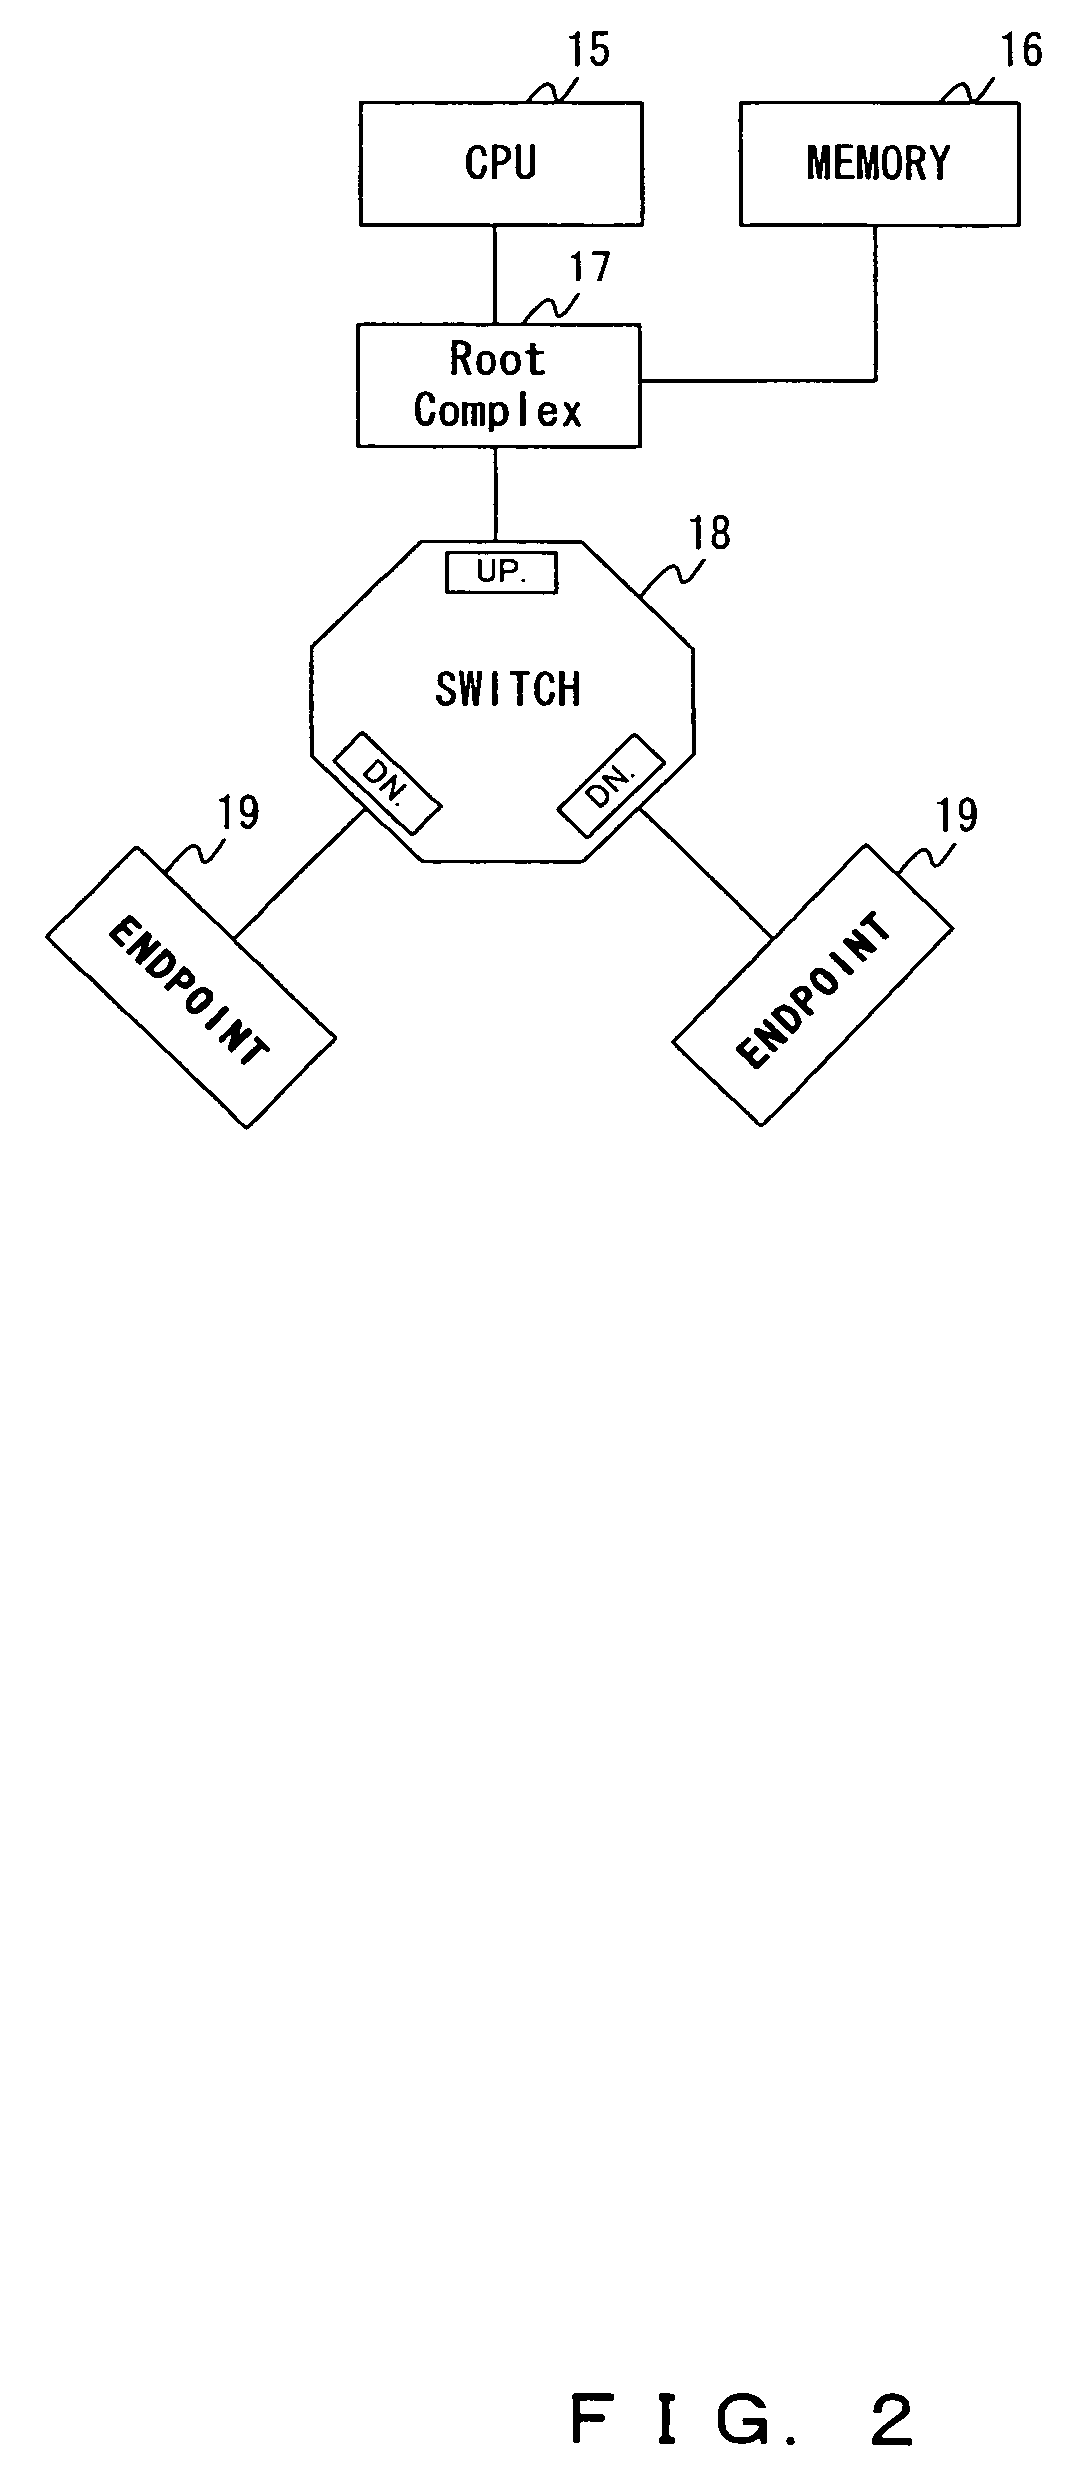 File control system and file control device